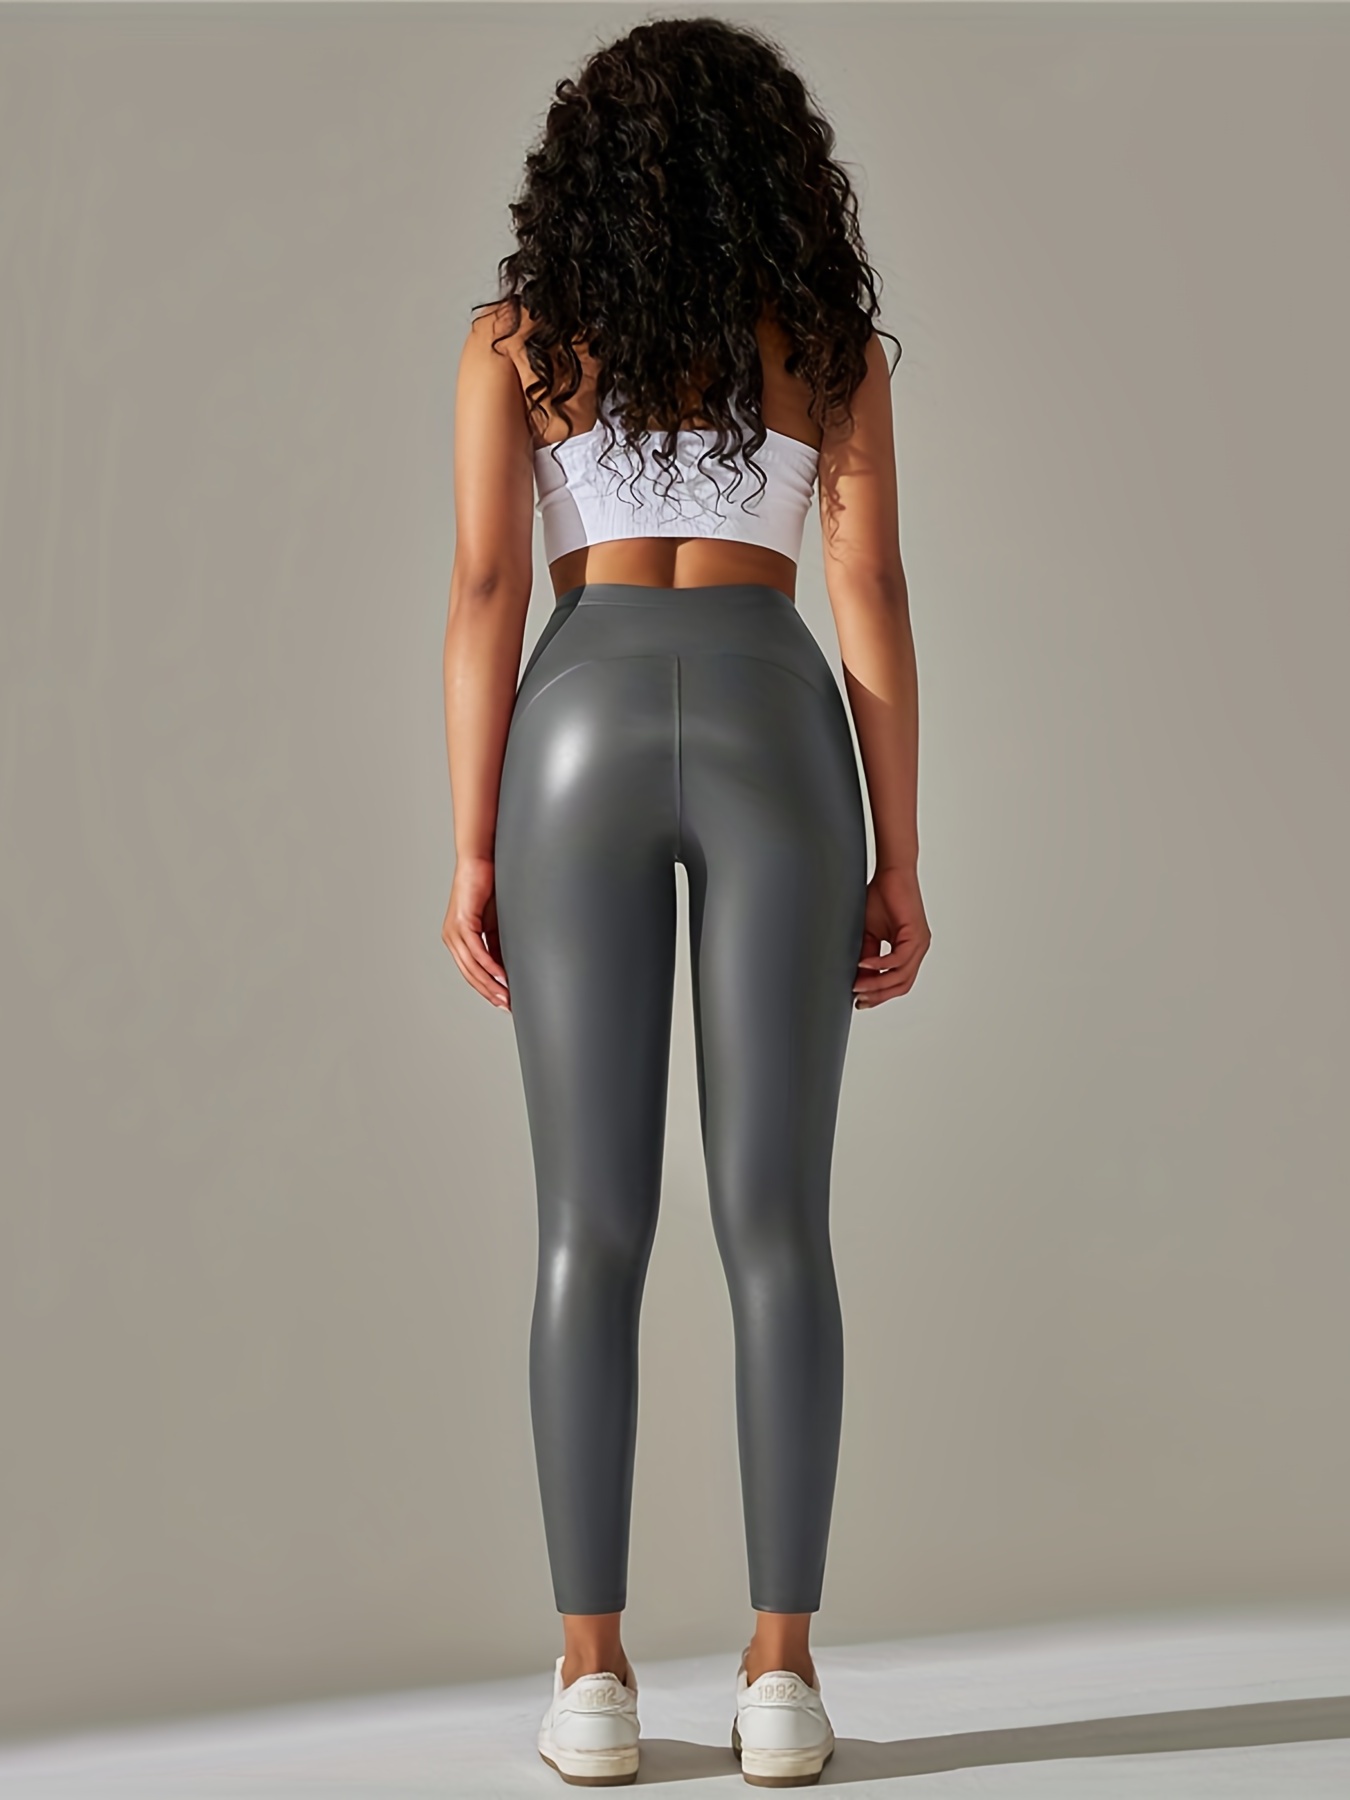 Gothic Solid PU Leather High Waist Leggings, Casual Skinny Long Length Sexy  Leggings, Women's Clothing